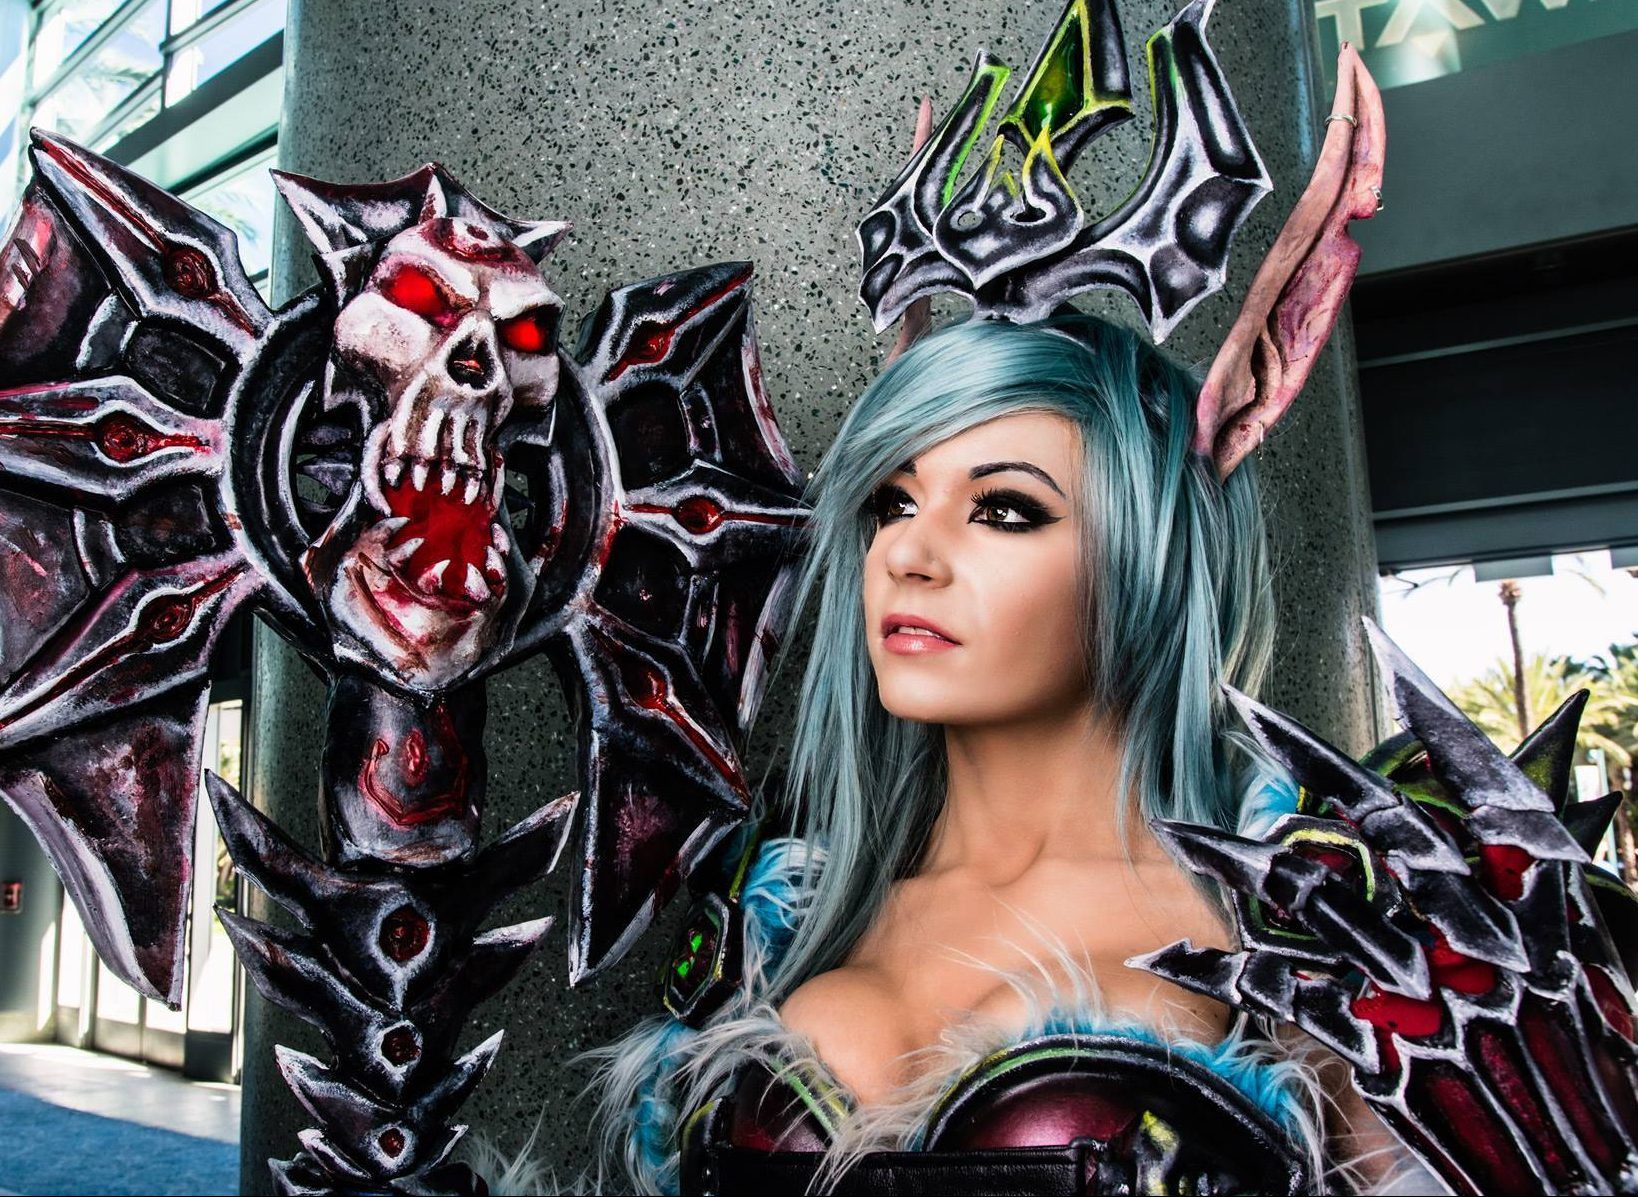 25 Hottest World Of Warcraft Cosplays EVER